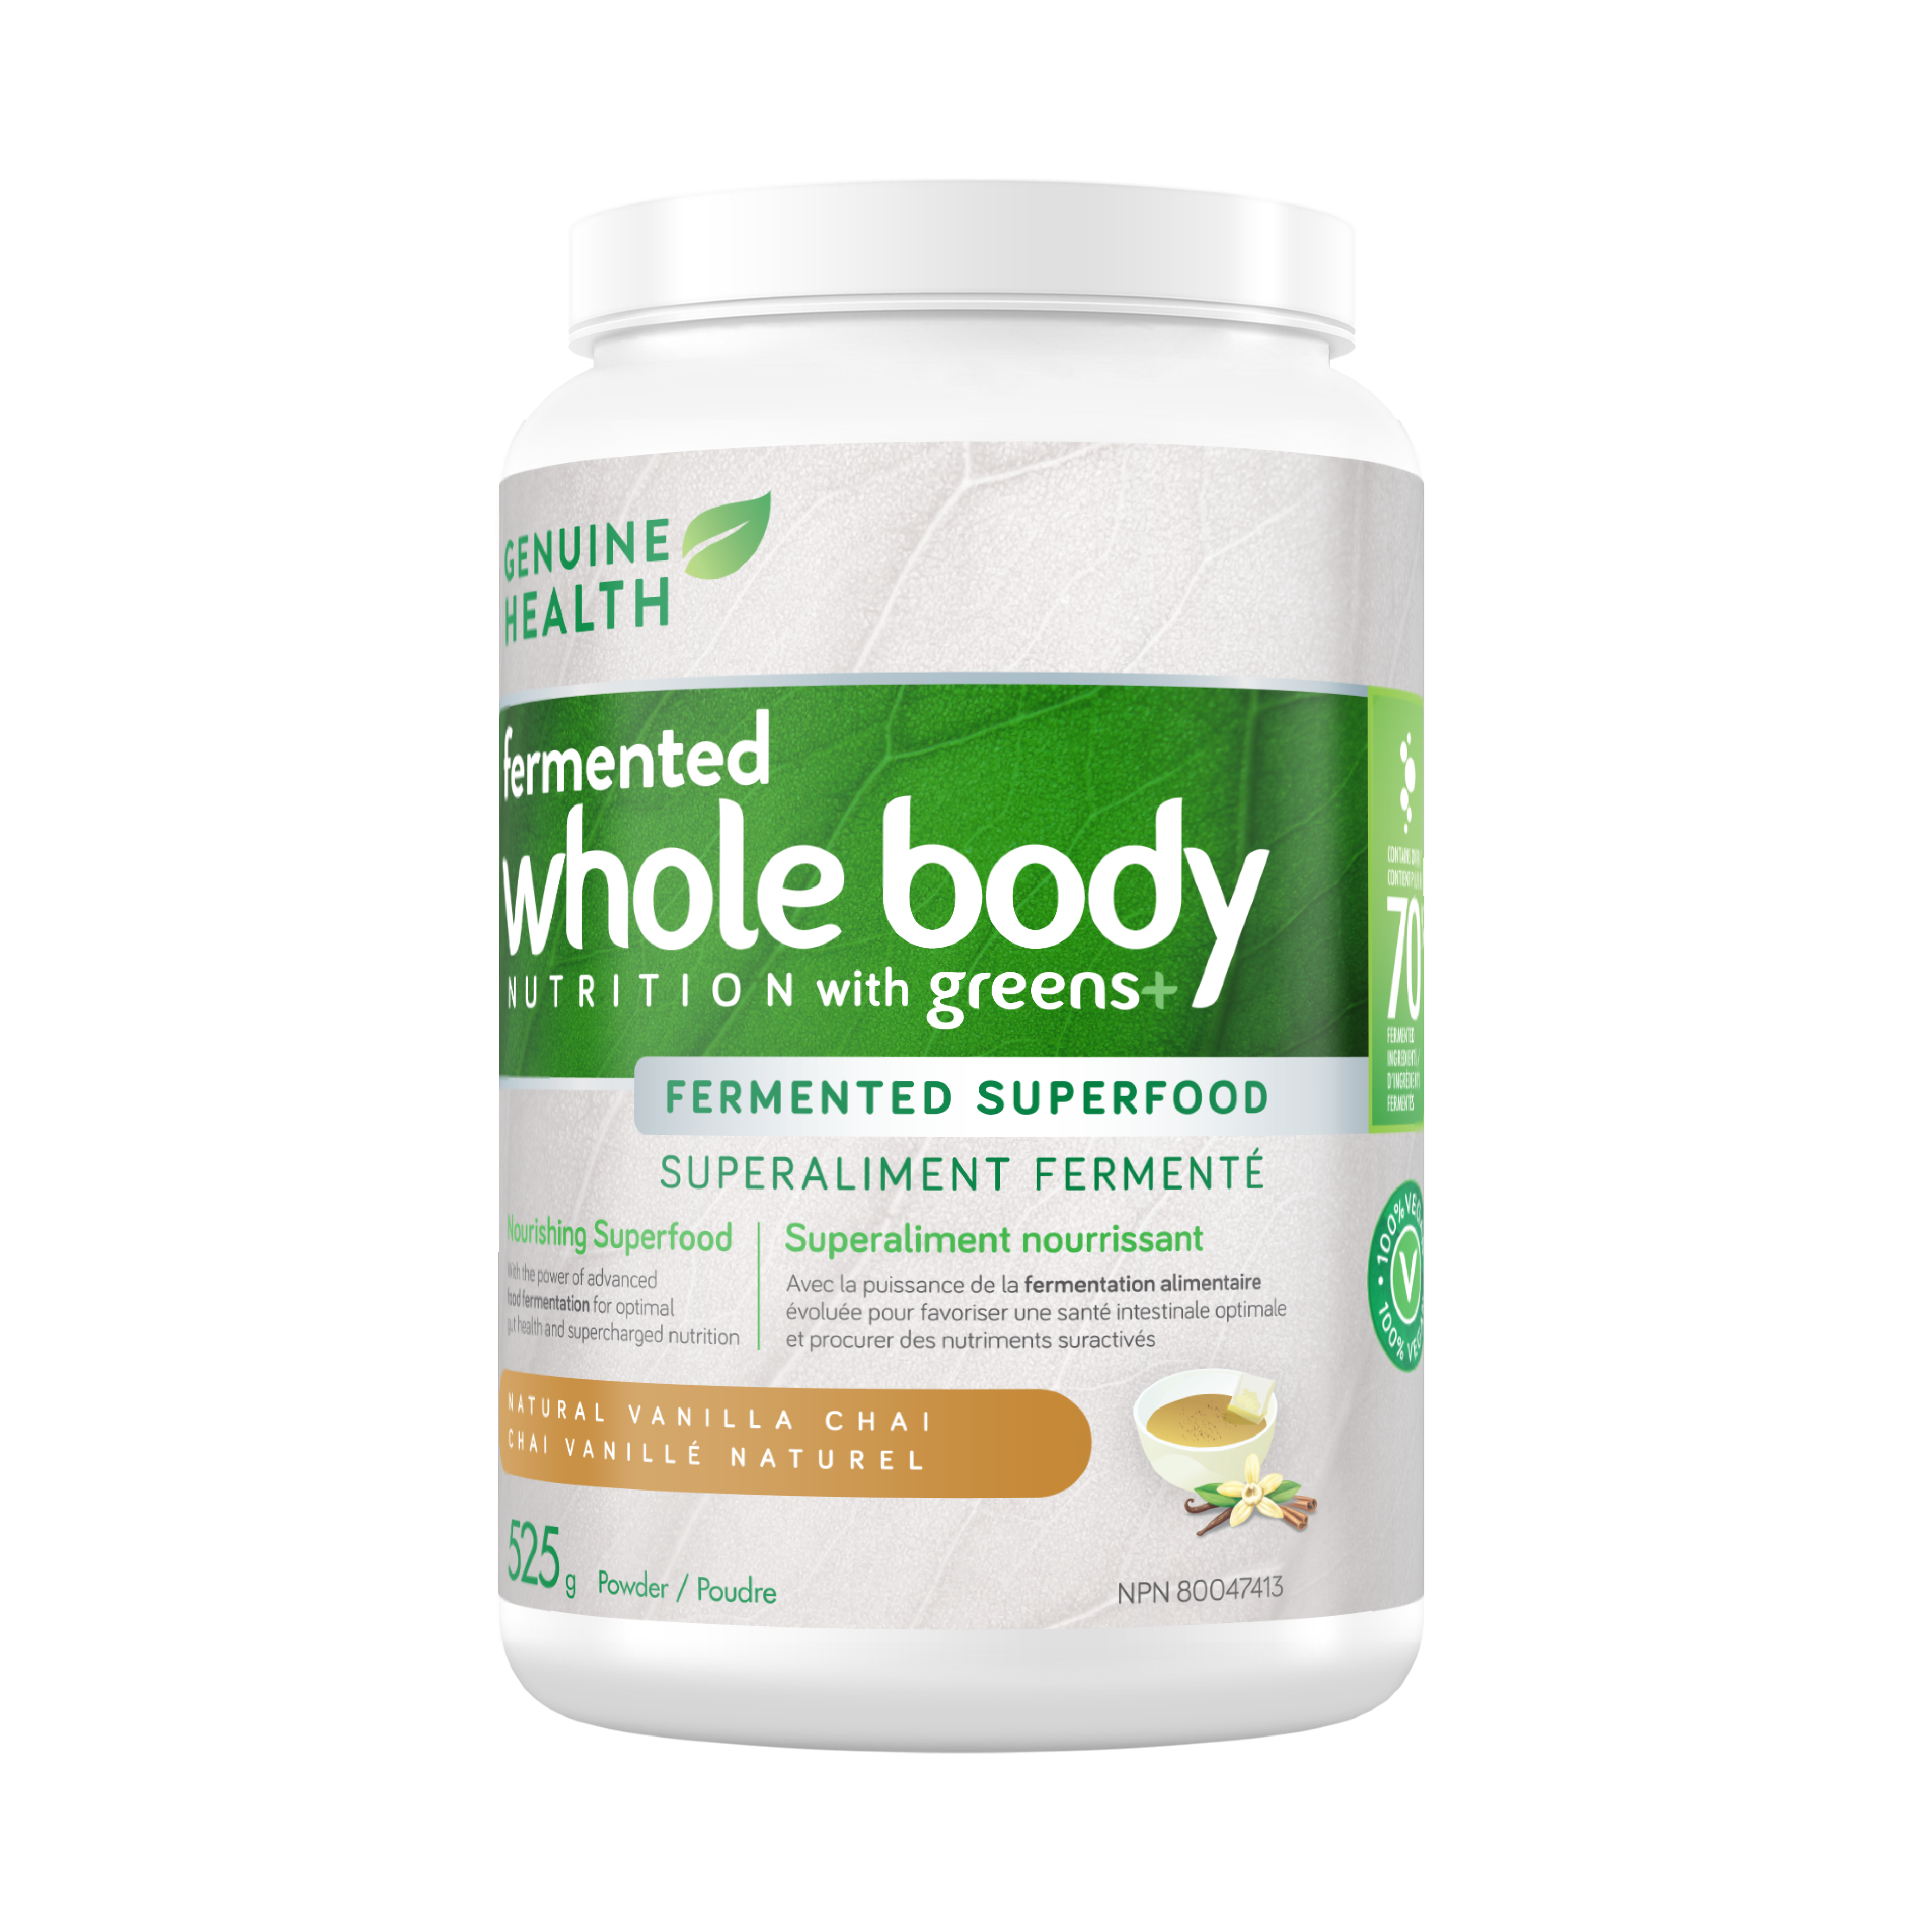 Genuine Health Fermented Whole Body Nutrition With Greens+ (Flavour Options)